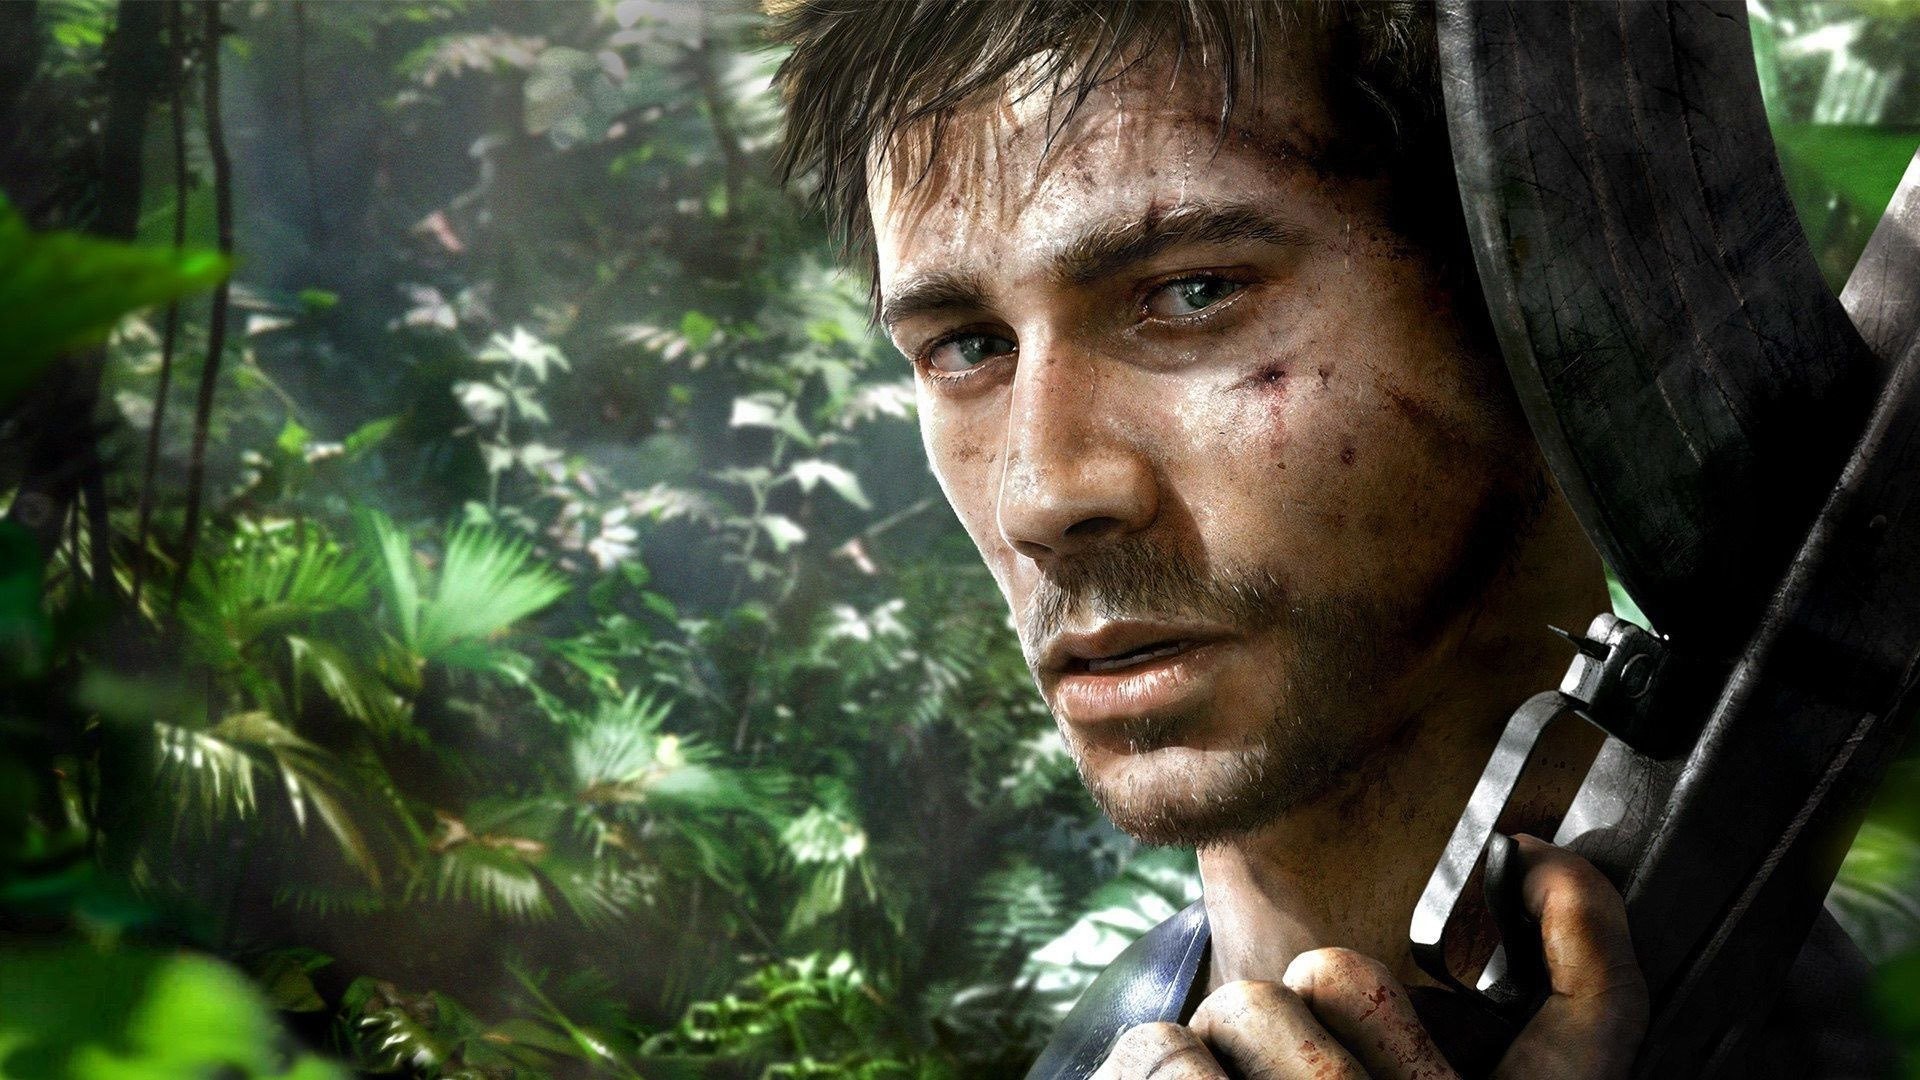 1920x1080 Citra Montenegro - Far Cry 3 wallpaper | FarCry | Pinterest | Montenegro  and Crying